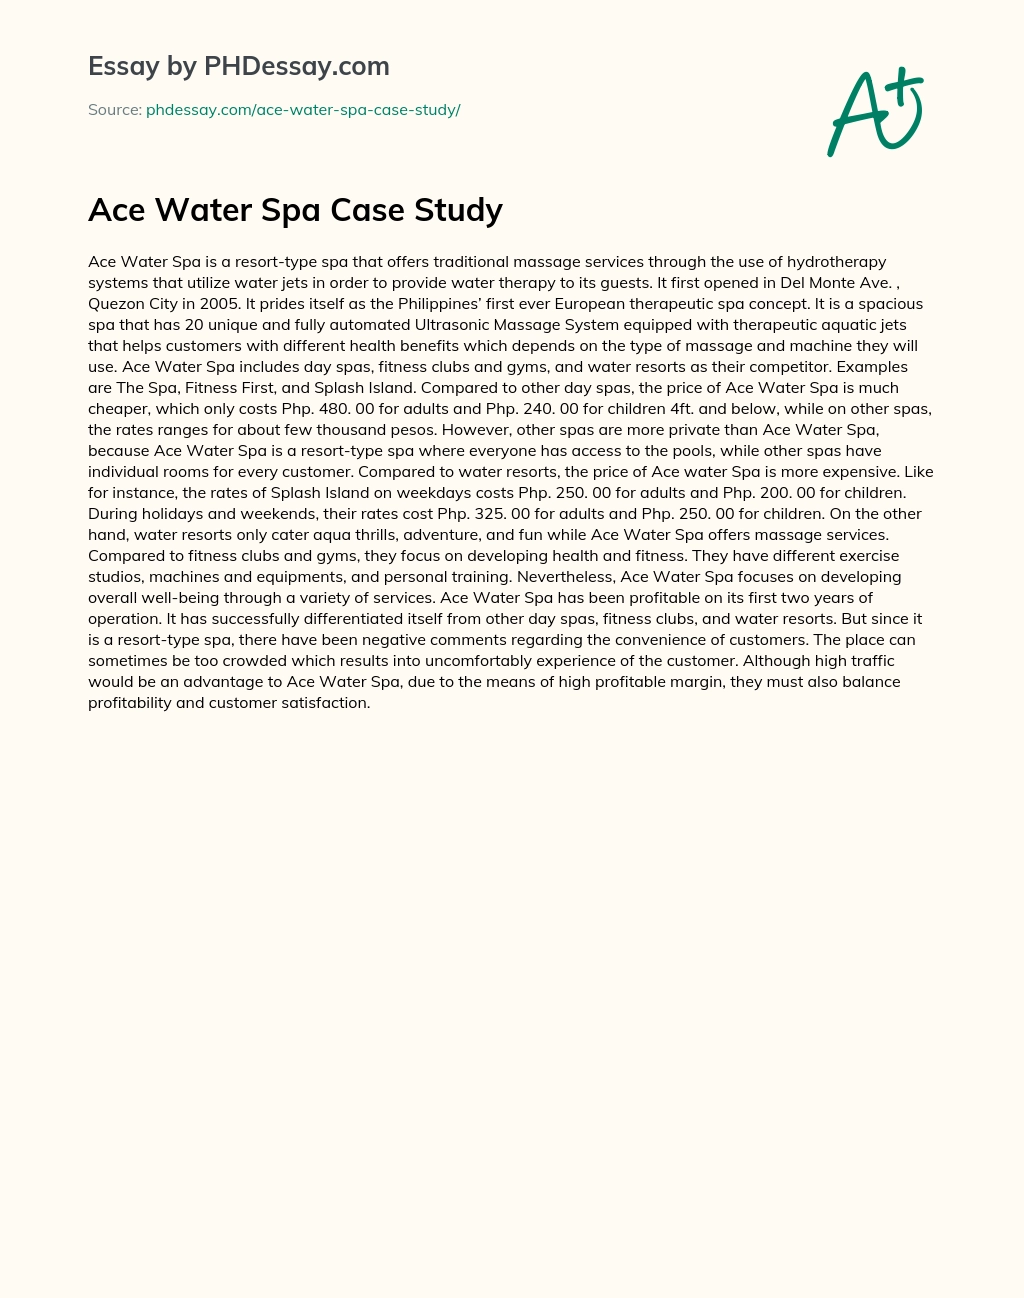 Ace Water Spa Case Study essay